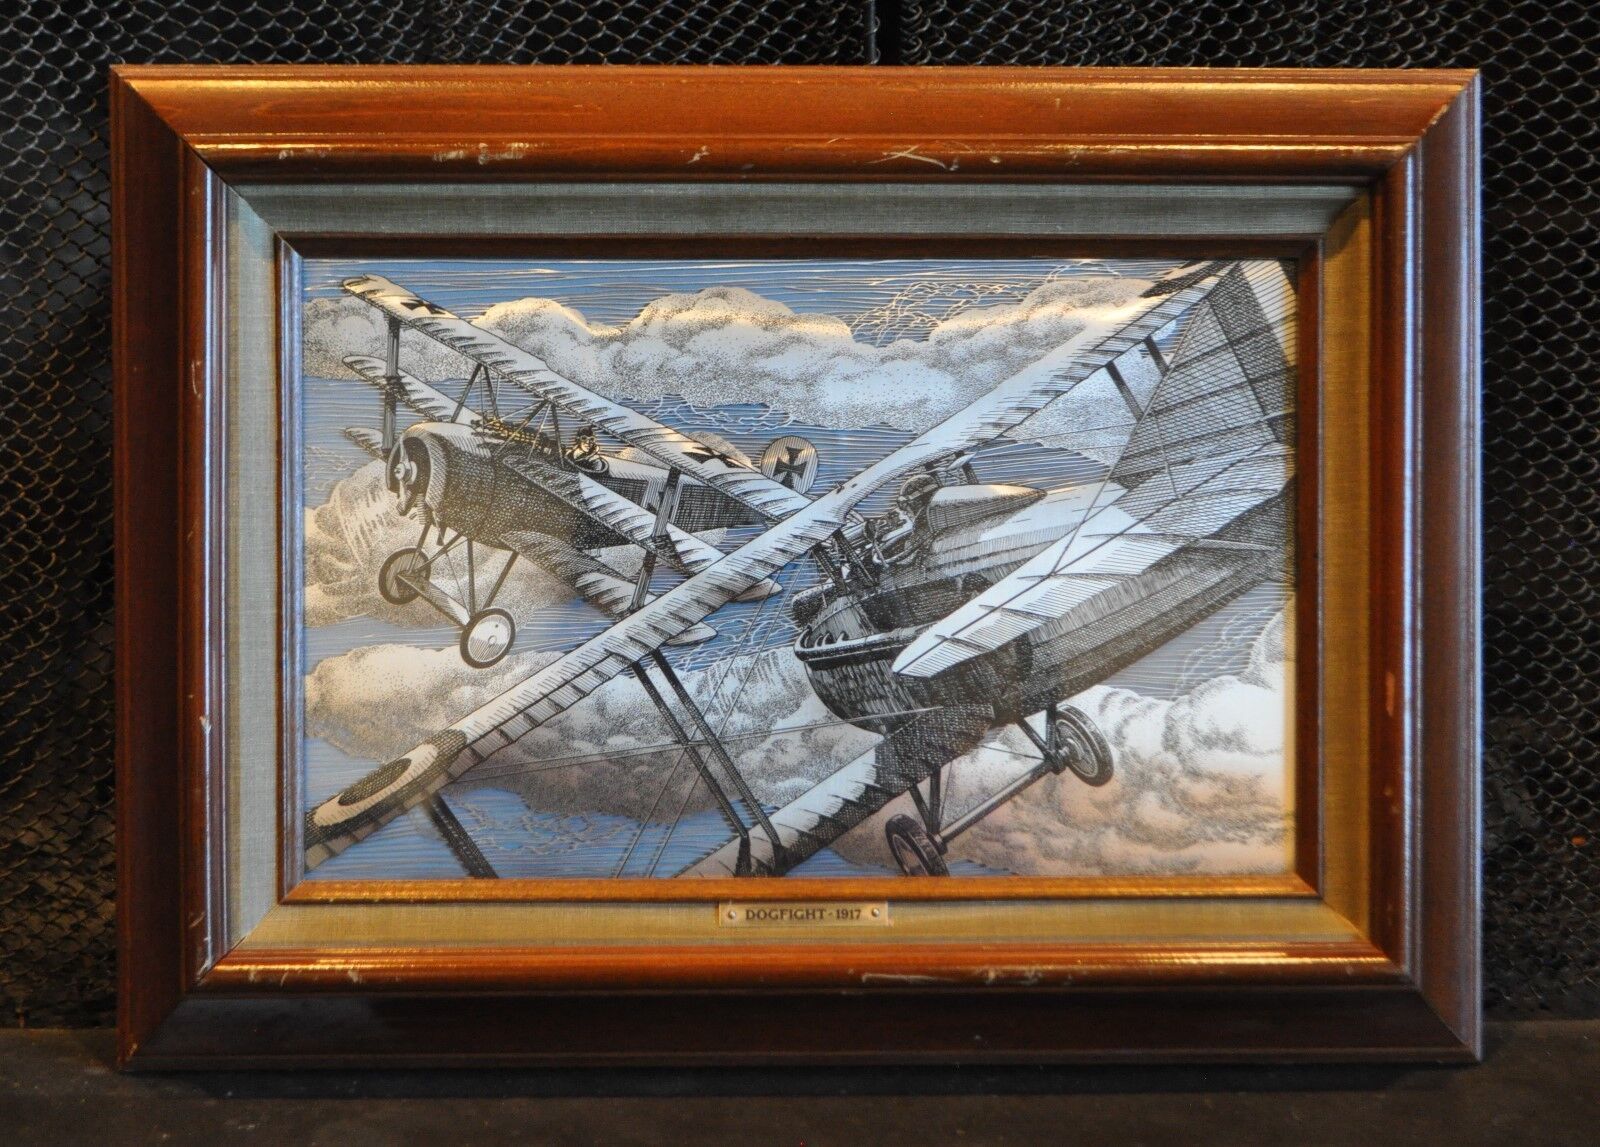 Dogfight 1917 WWI - Lmtd Ed Etched Sterling Franklin Mint - HD2 Fighter Planes